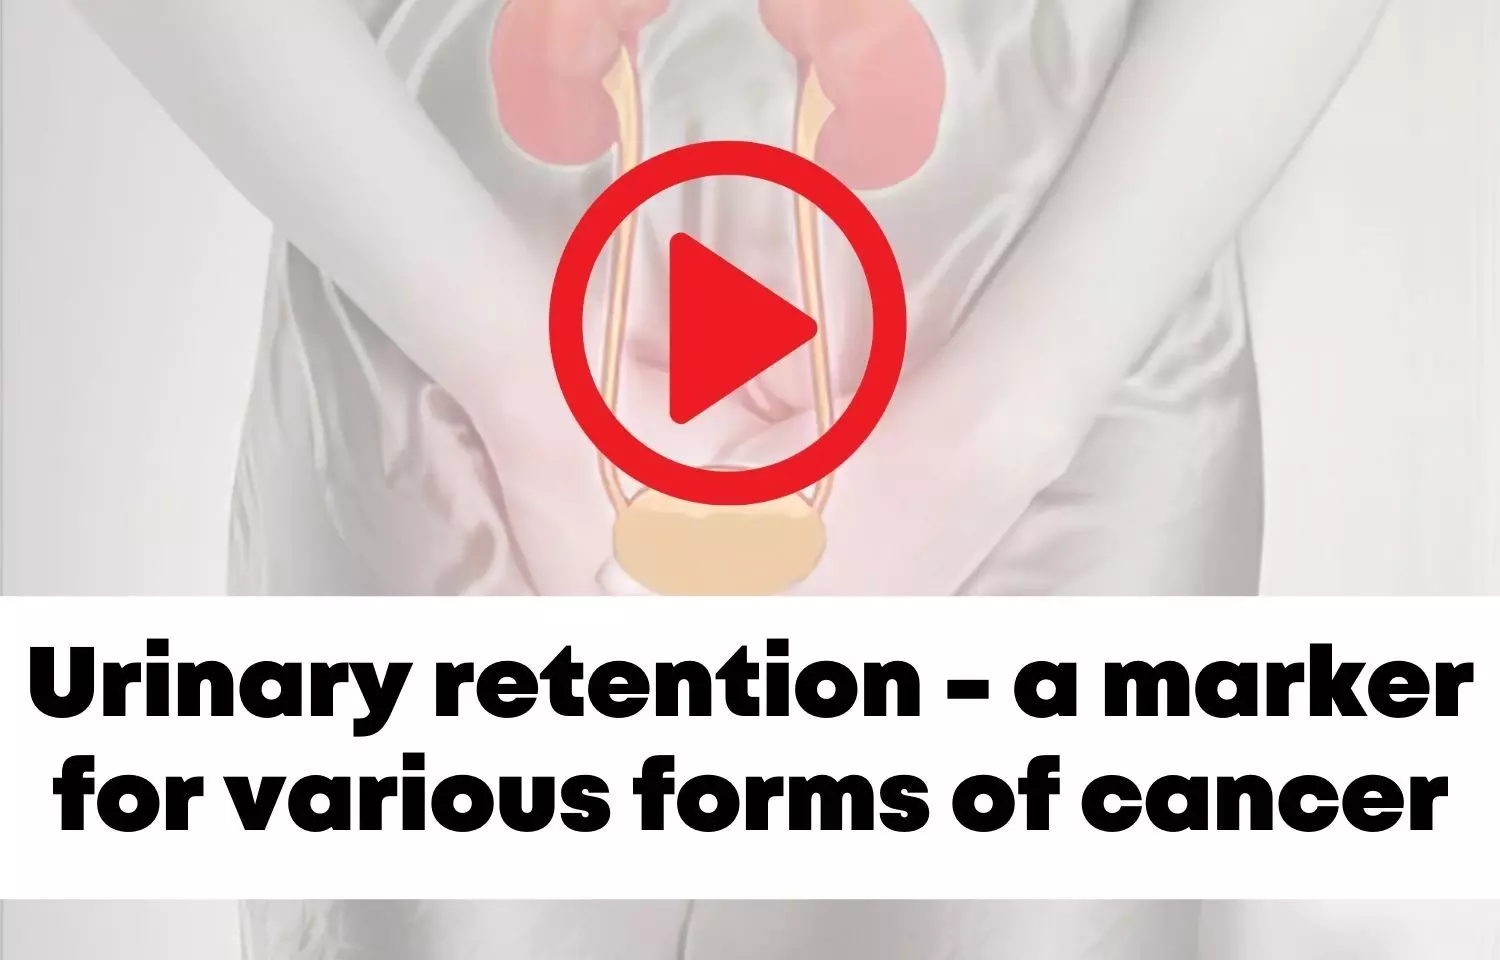 Urinary retention - a marker for various forms of cancer